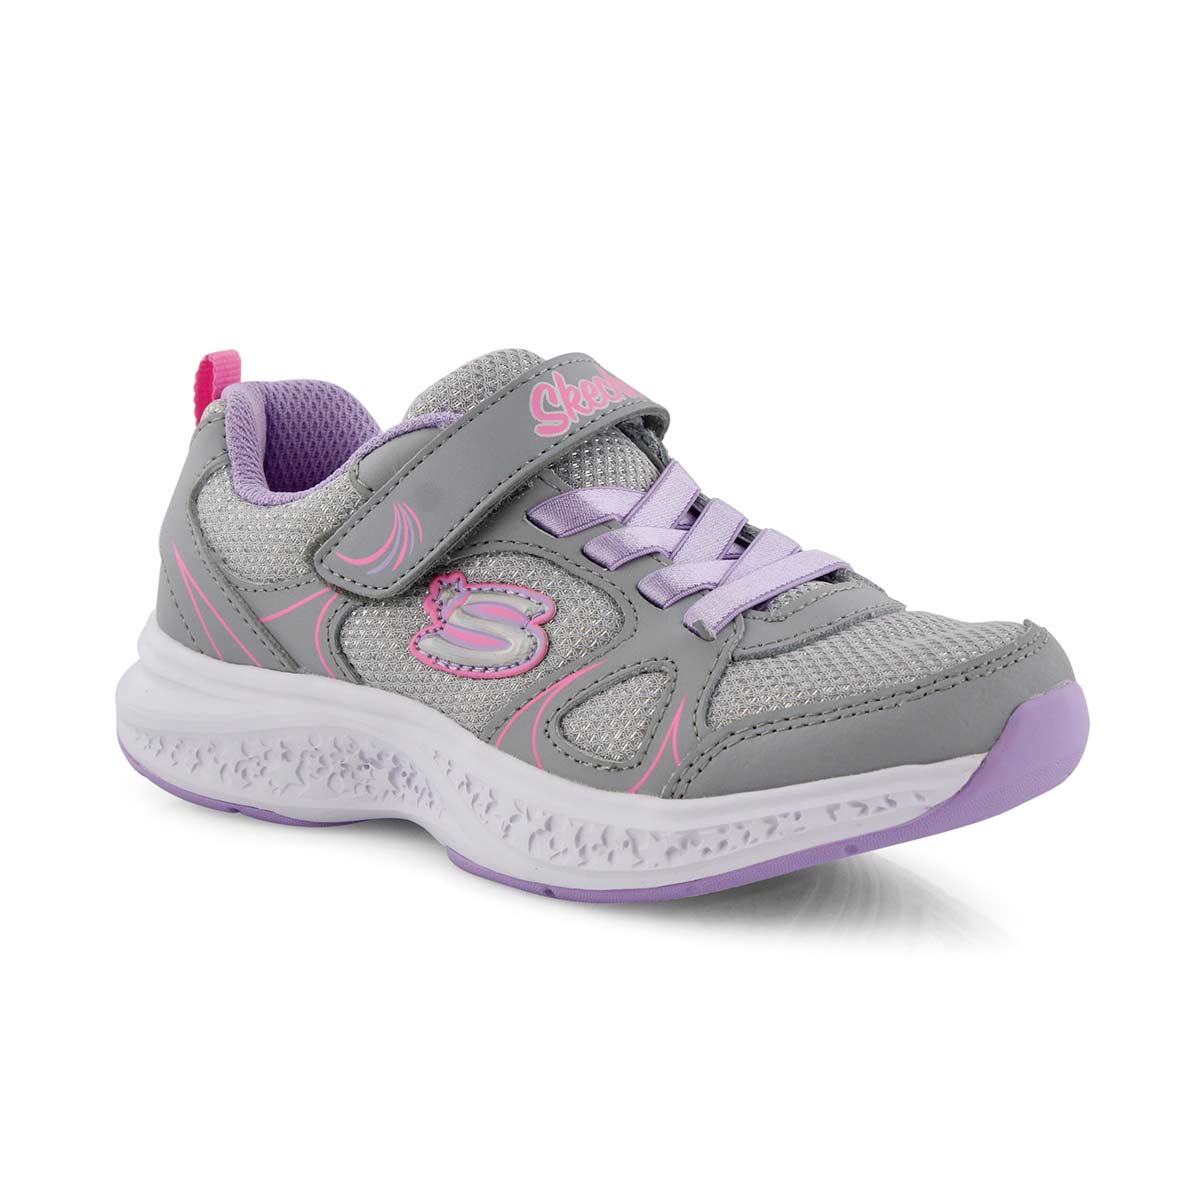 purple and gray sneakers